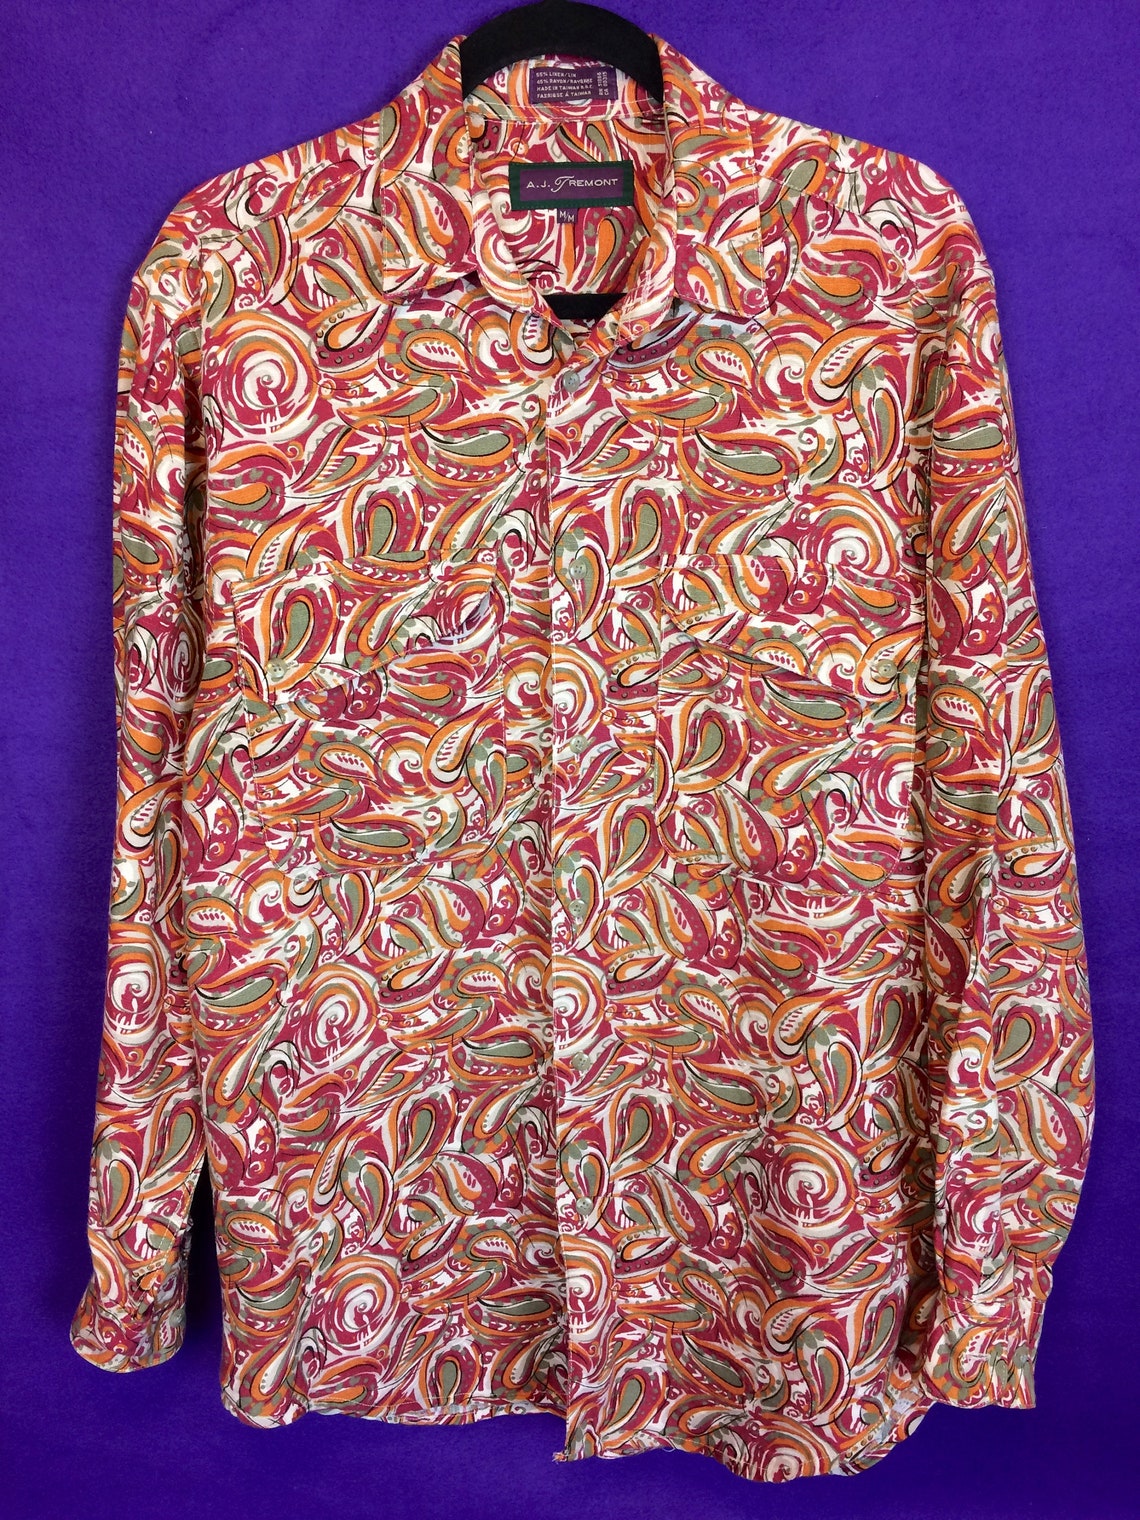 VTG 90s paisley abstract button up shirt multicolored | Etsy